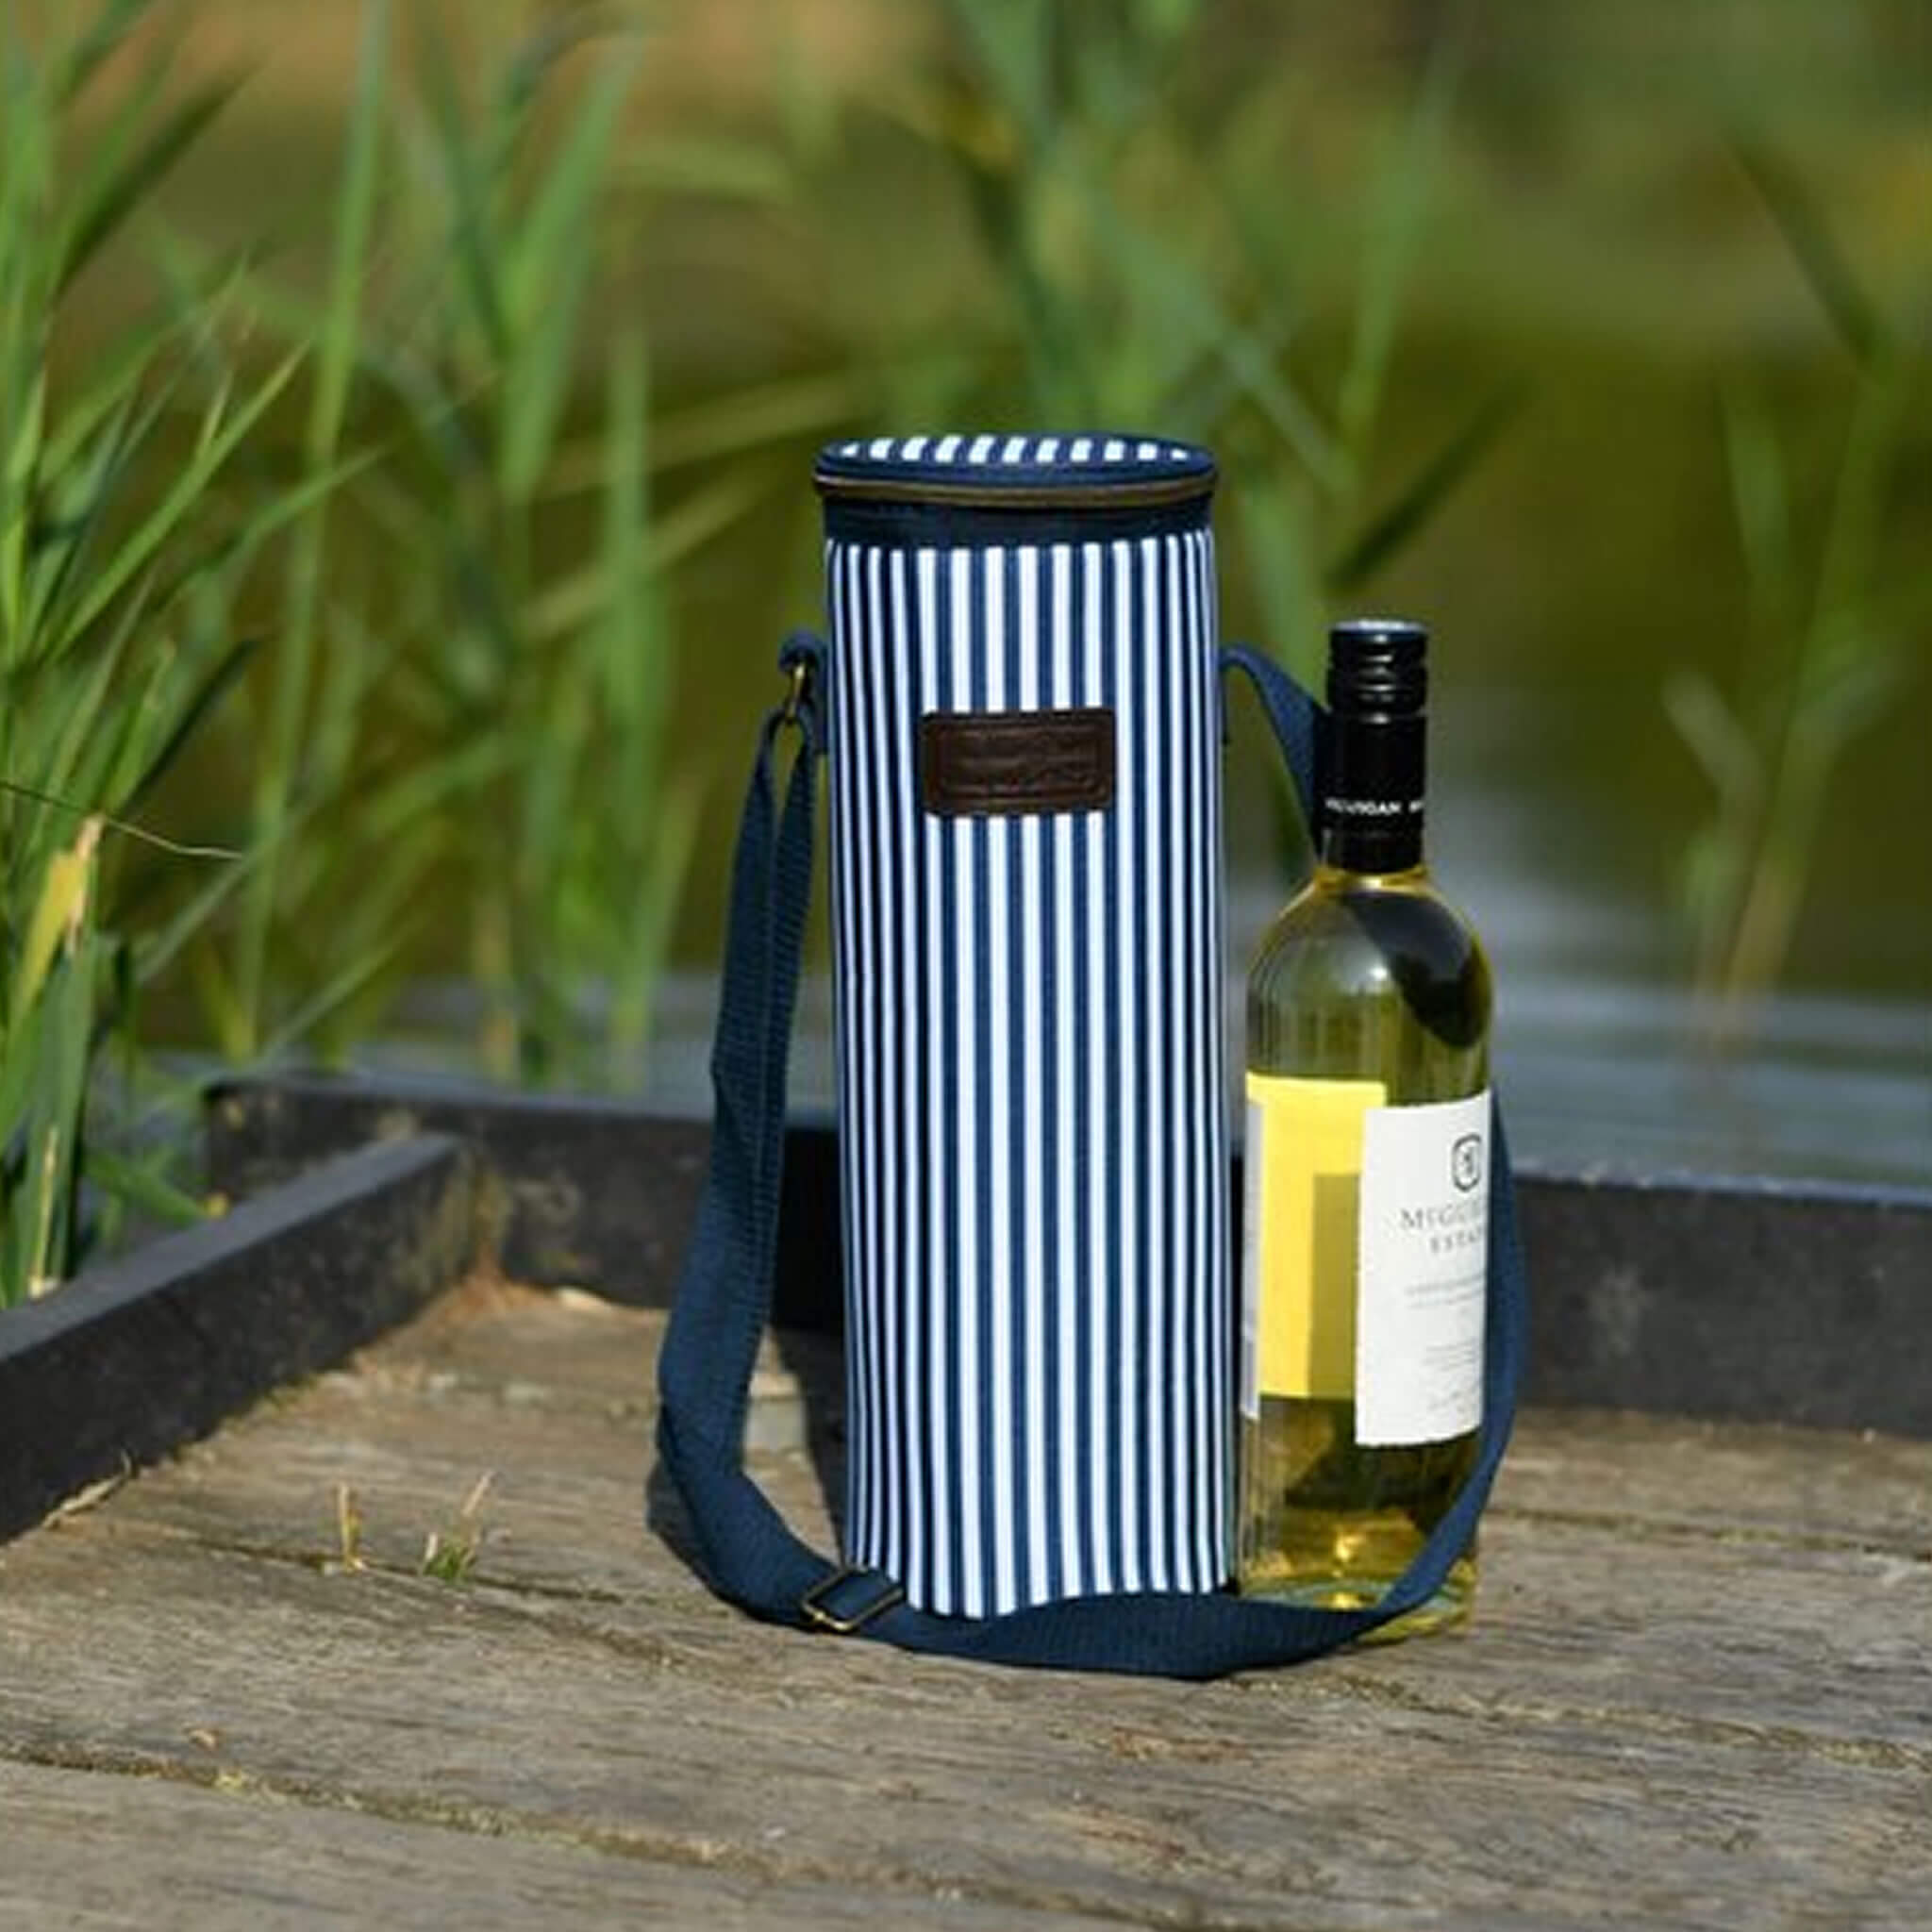 Three Rivers Bottle Carrier Cool Bag - Alfresco Dining Company